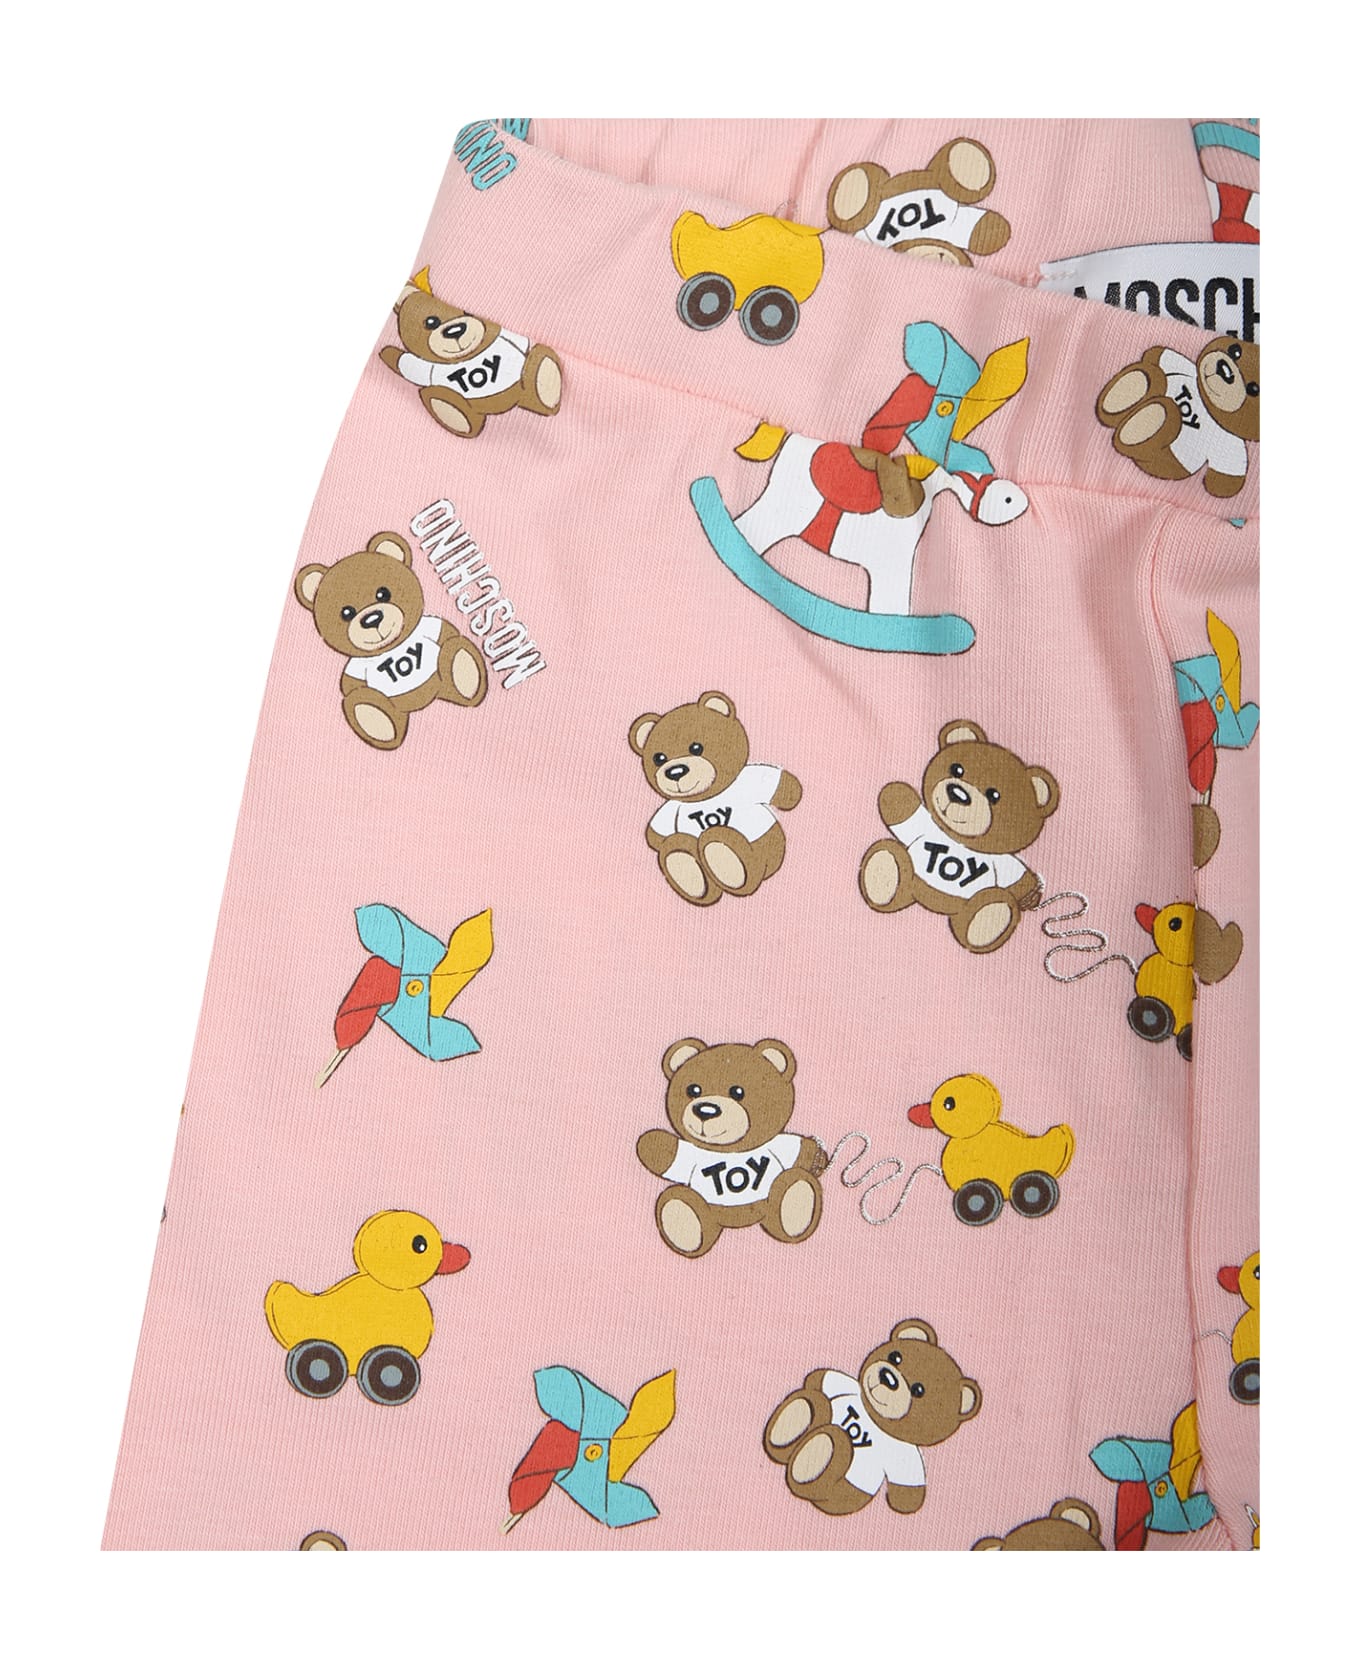 Moschino Multicolor Set For Baby Girl With Teddy Bear And Ducks - PINK/WHITE